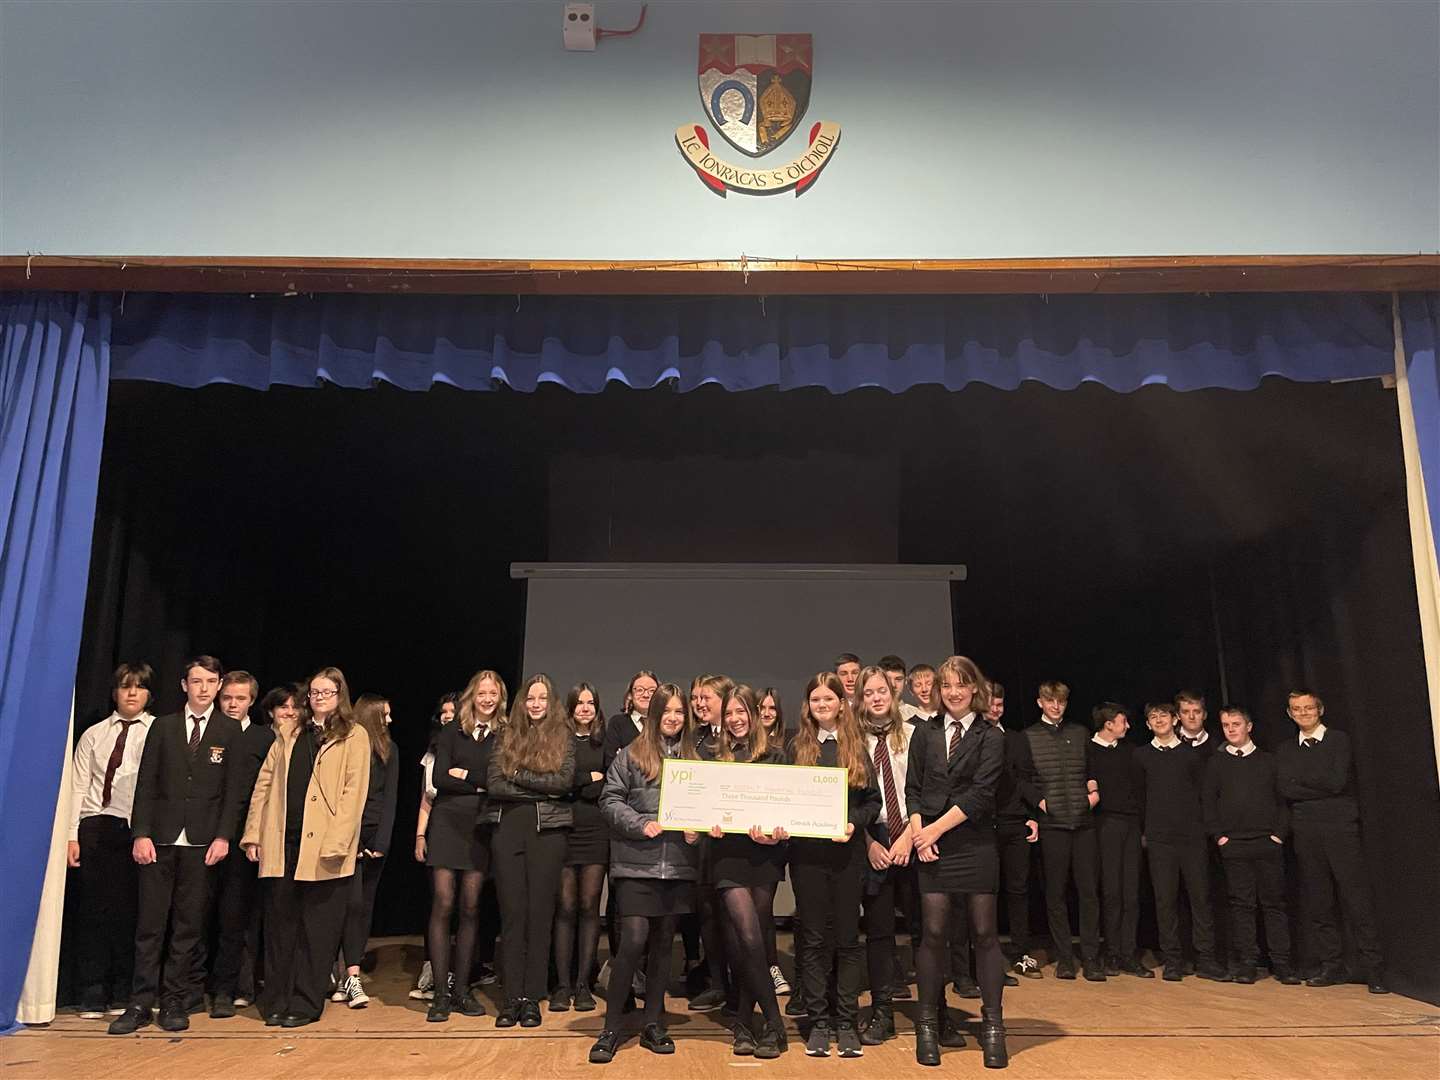 In the past, young people from Dornoch have won money for charities such as the Assynt Mountain Rescue and the Young Karers East Sutherland (TYKES).